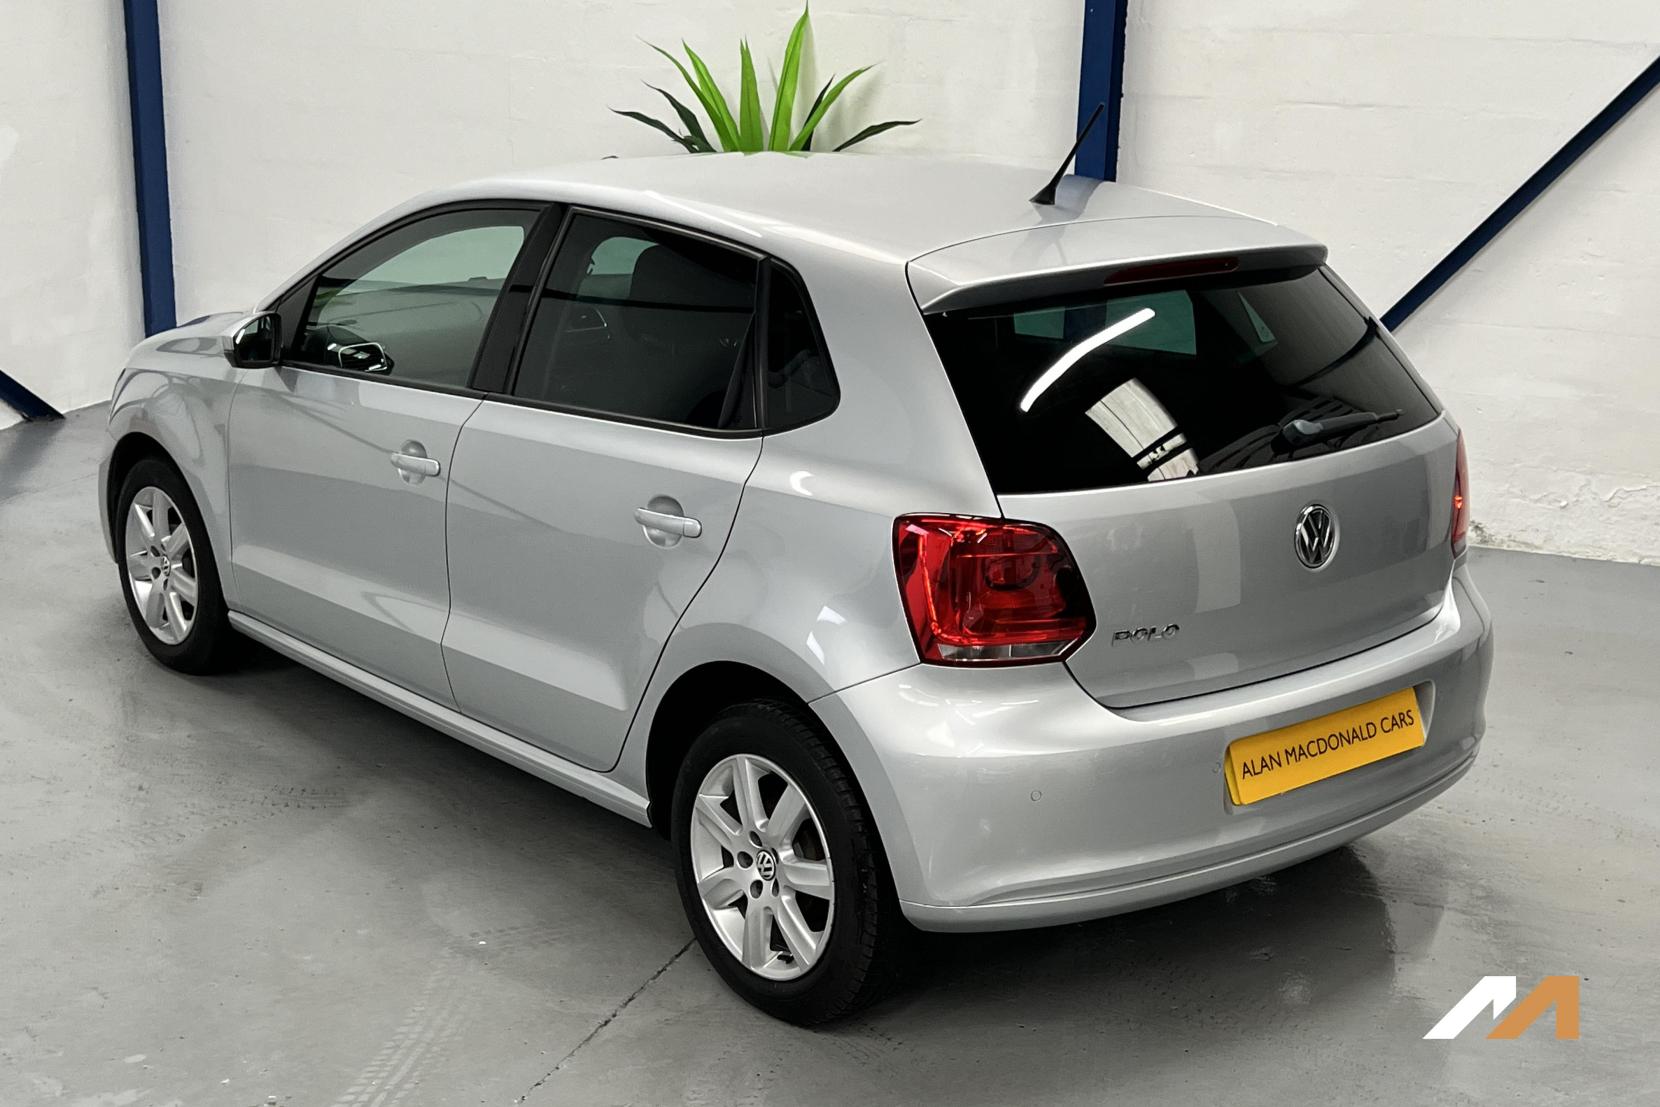 Volkswagen Polo 1.4 Match Edition Hatchback 5dr Petrol Manual Euro 5 (85 ps)